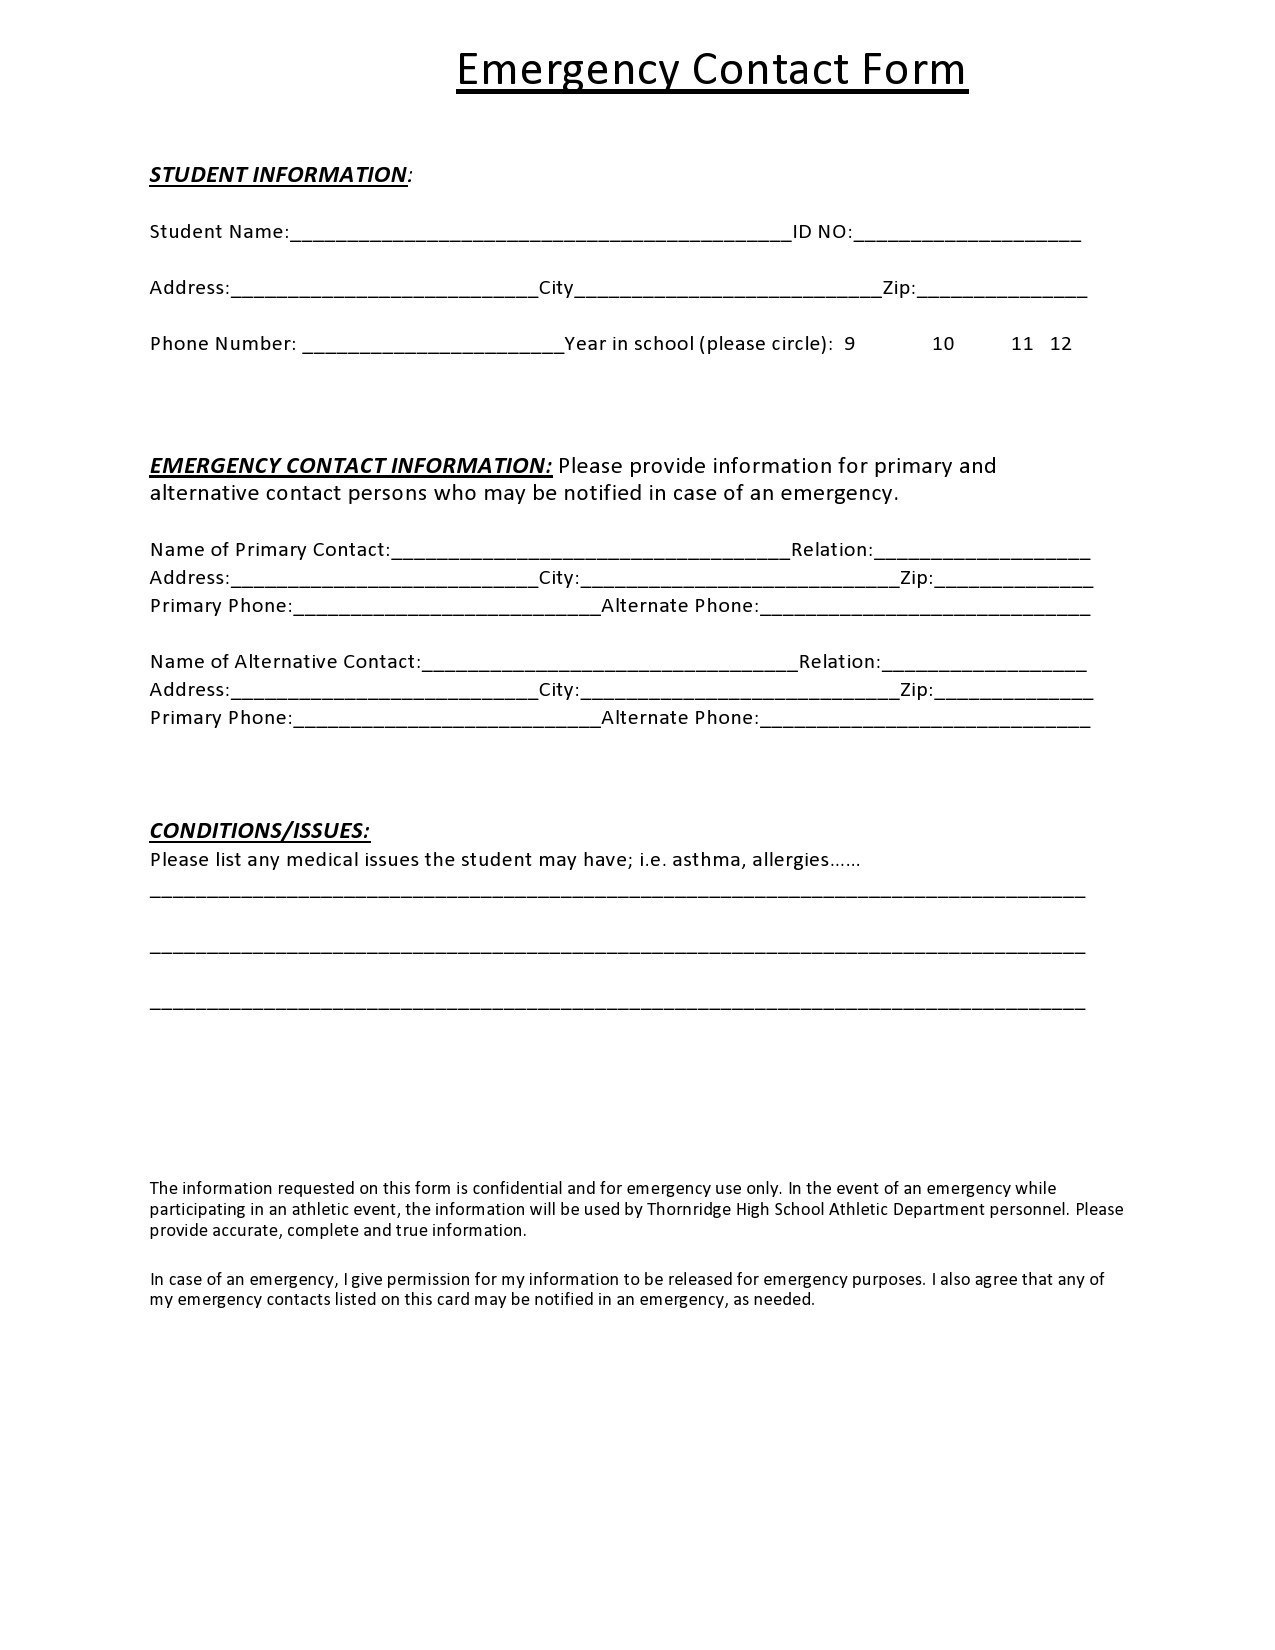 Free emergency contact form 03